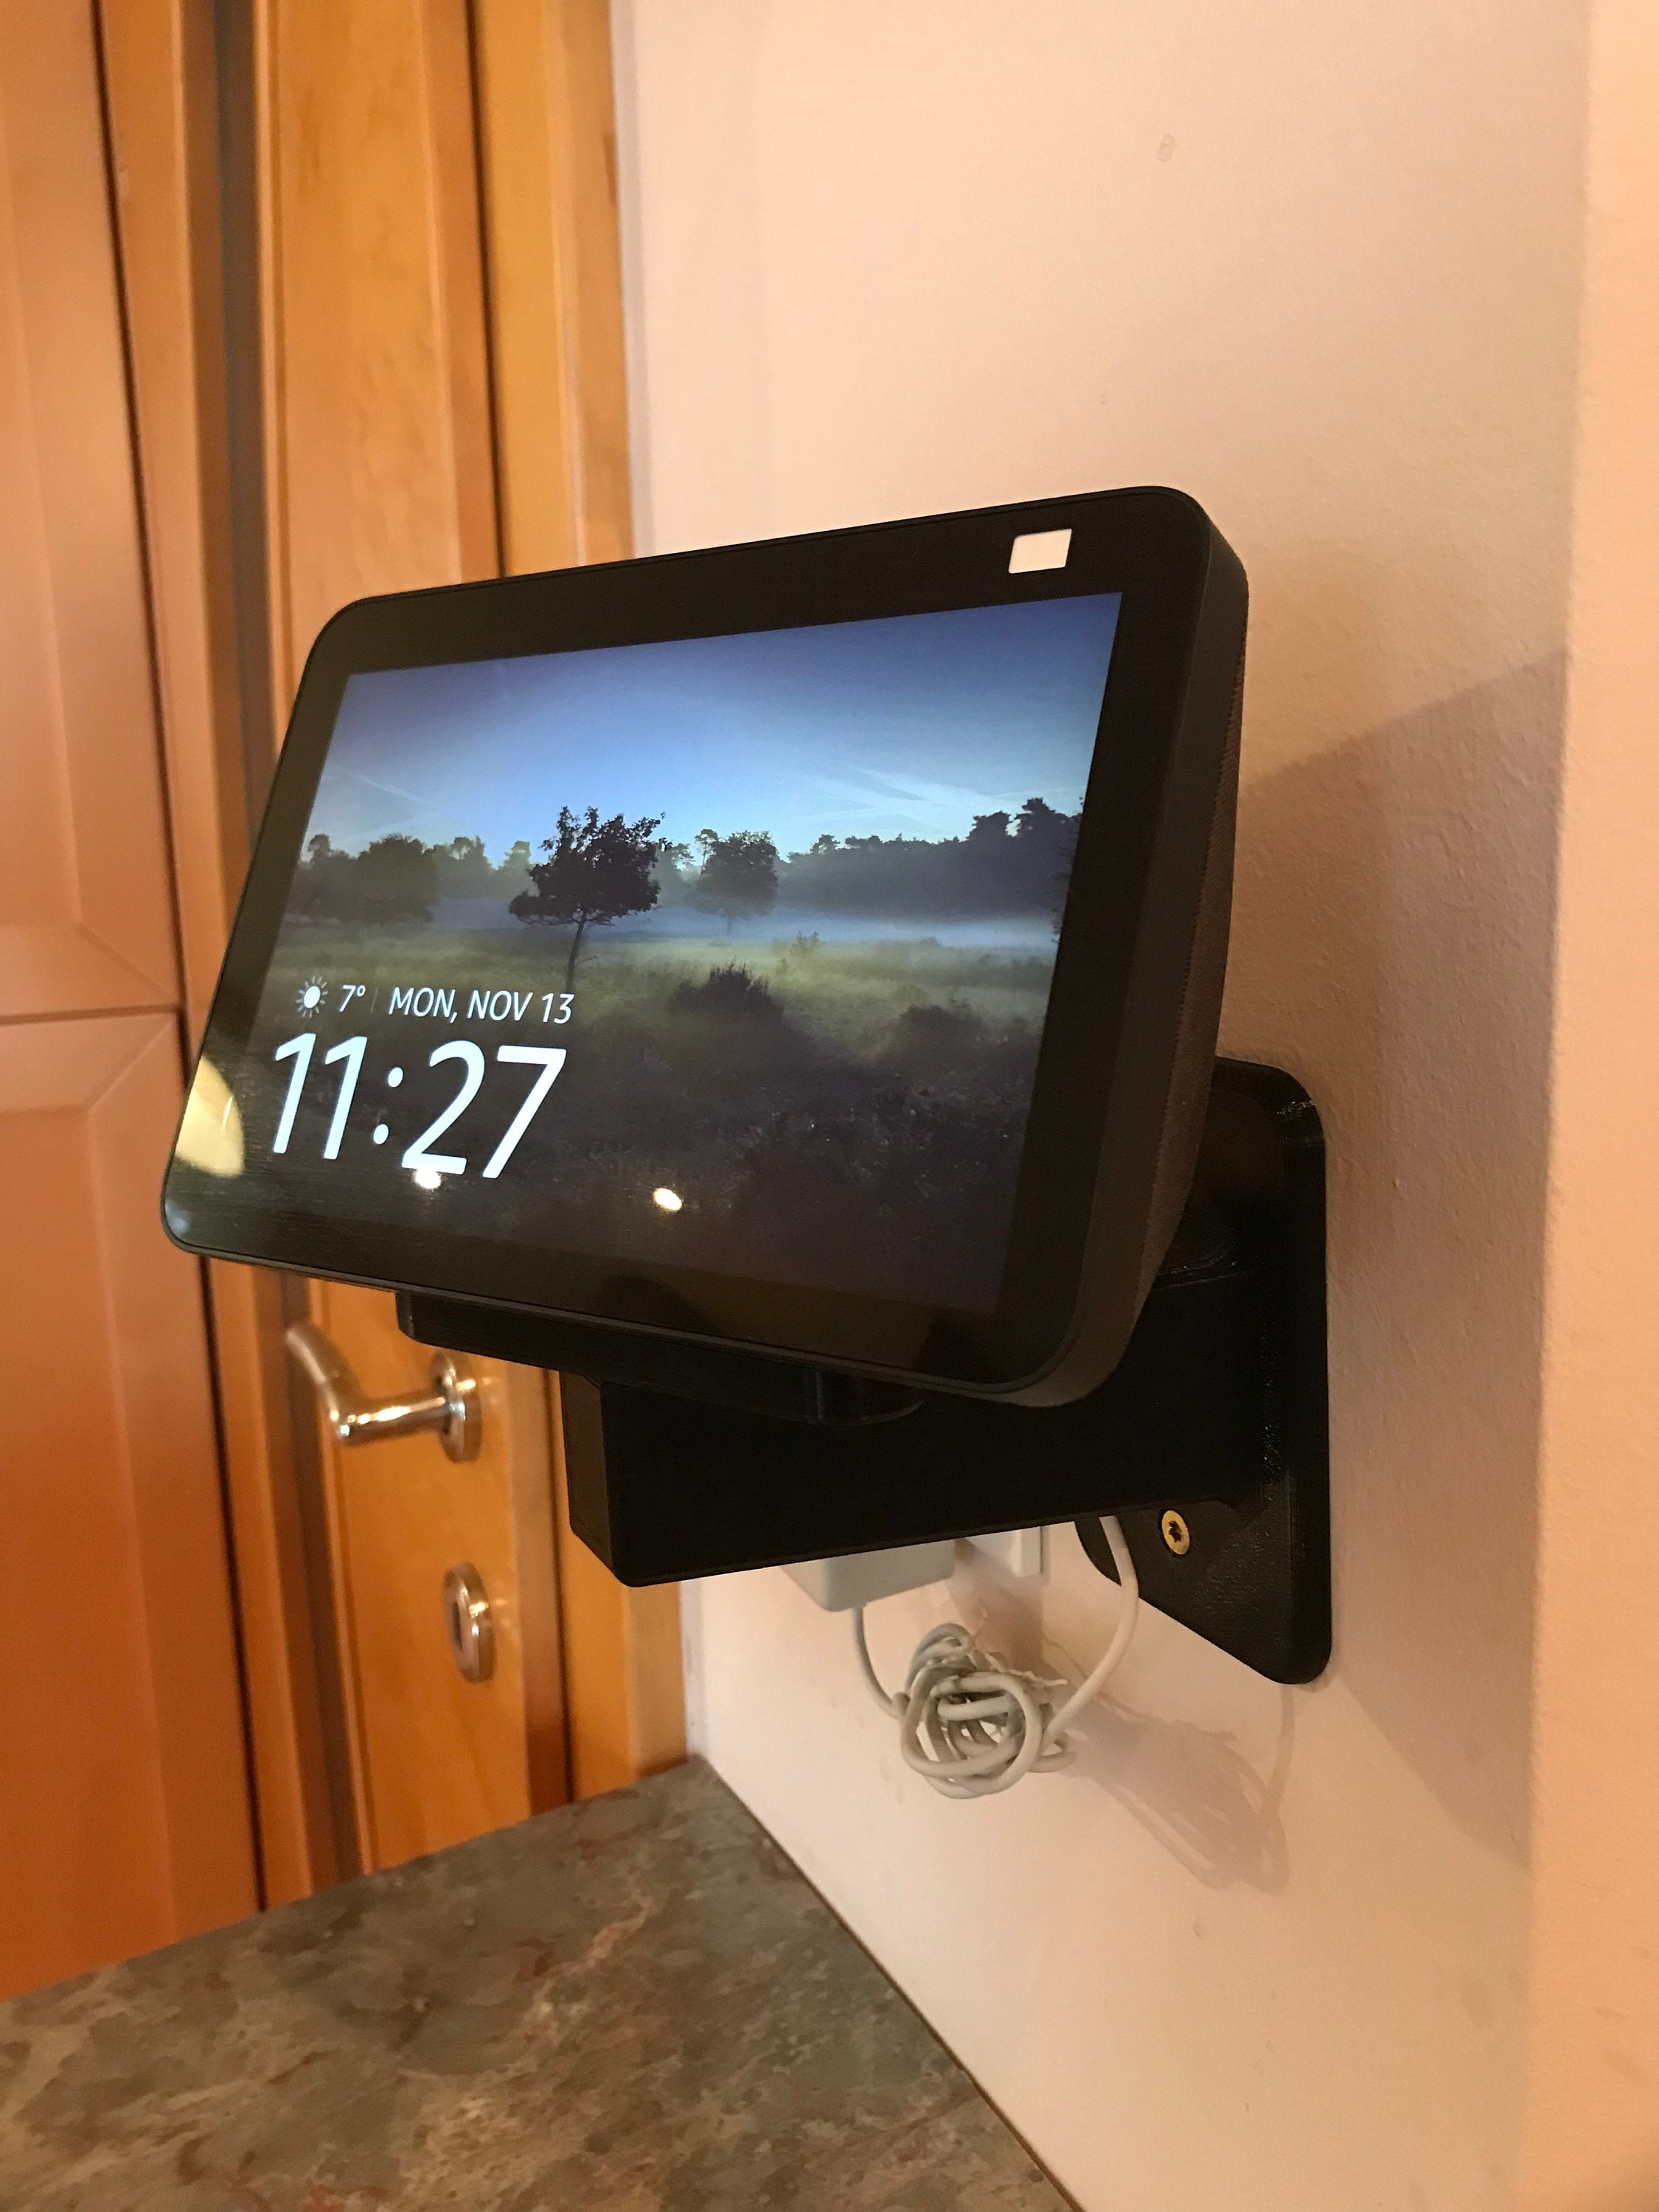 Made for  Premium Tilt + Swivel Stand for the Echo Show 8 - Easily  Adjustable with Magnet Glide Technology - White